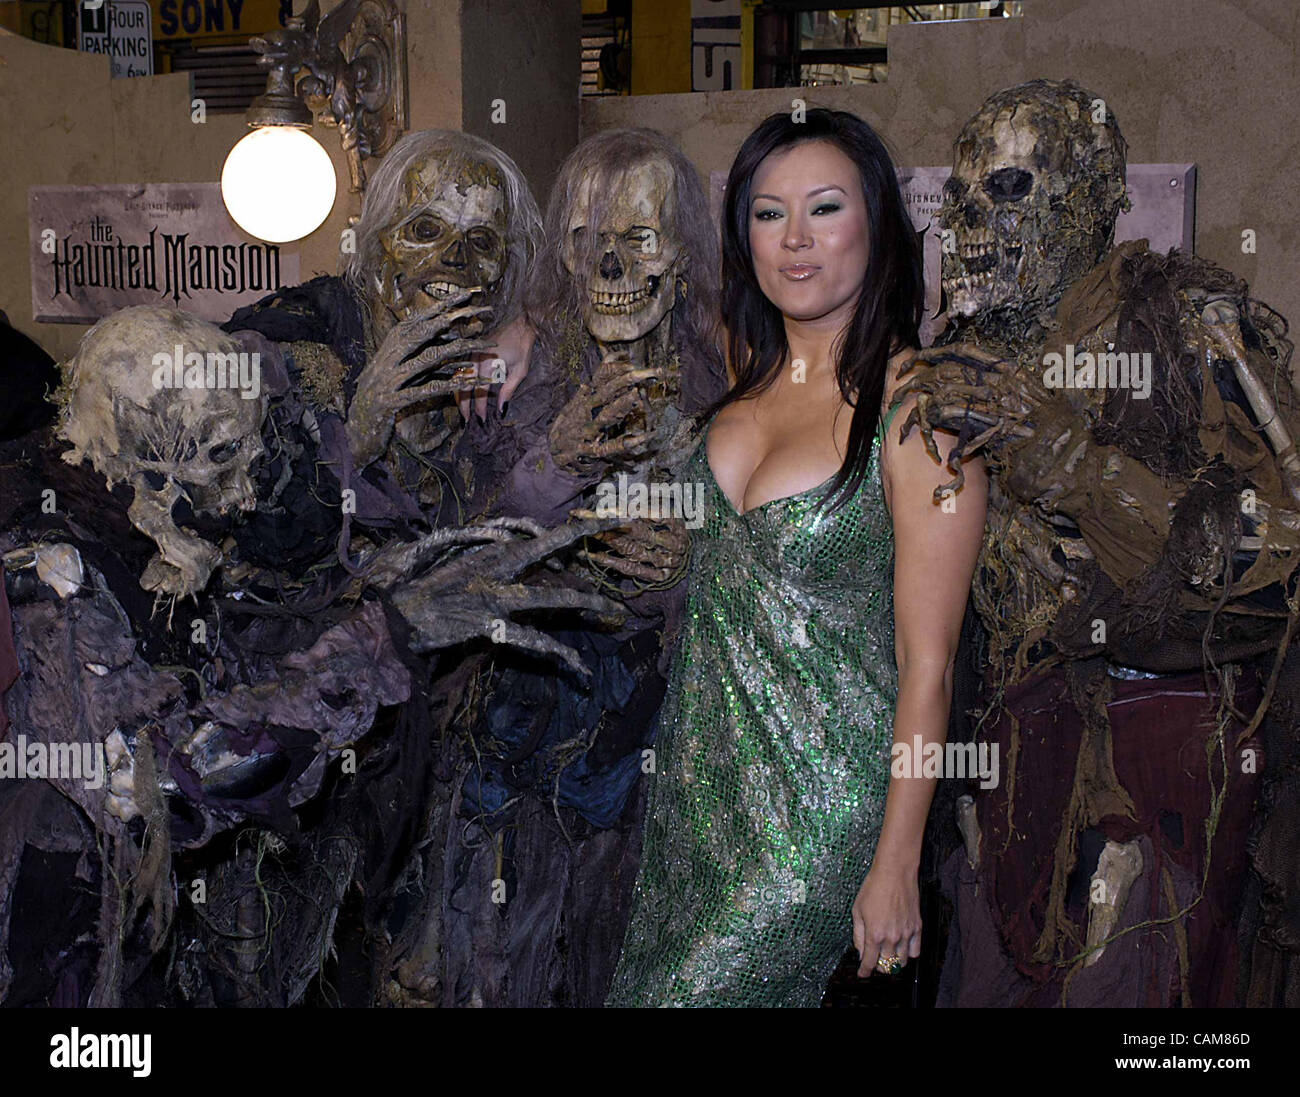 Nov. 23, 2003 - Hollywood, USA - Jennifer Tilly and her ghoulfriends at the premiere of Disney's ''The Haunted Mansion'' in Hollywood. (Credit Image: Â© Brian Cahn/ZUMAPRESS.com) Stock Photo